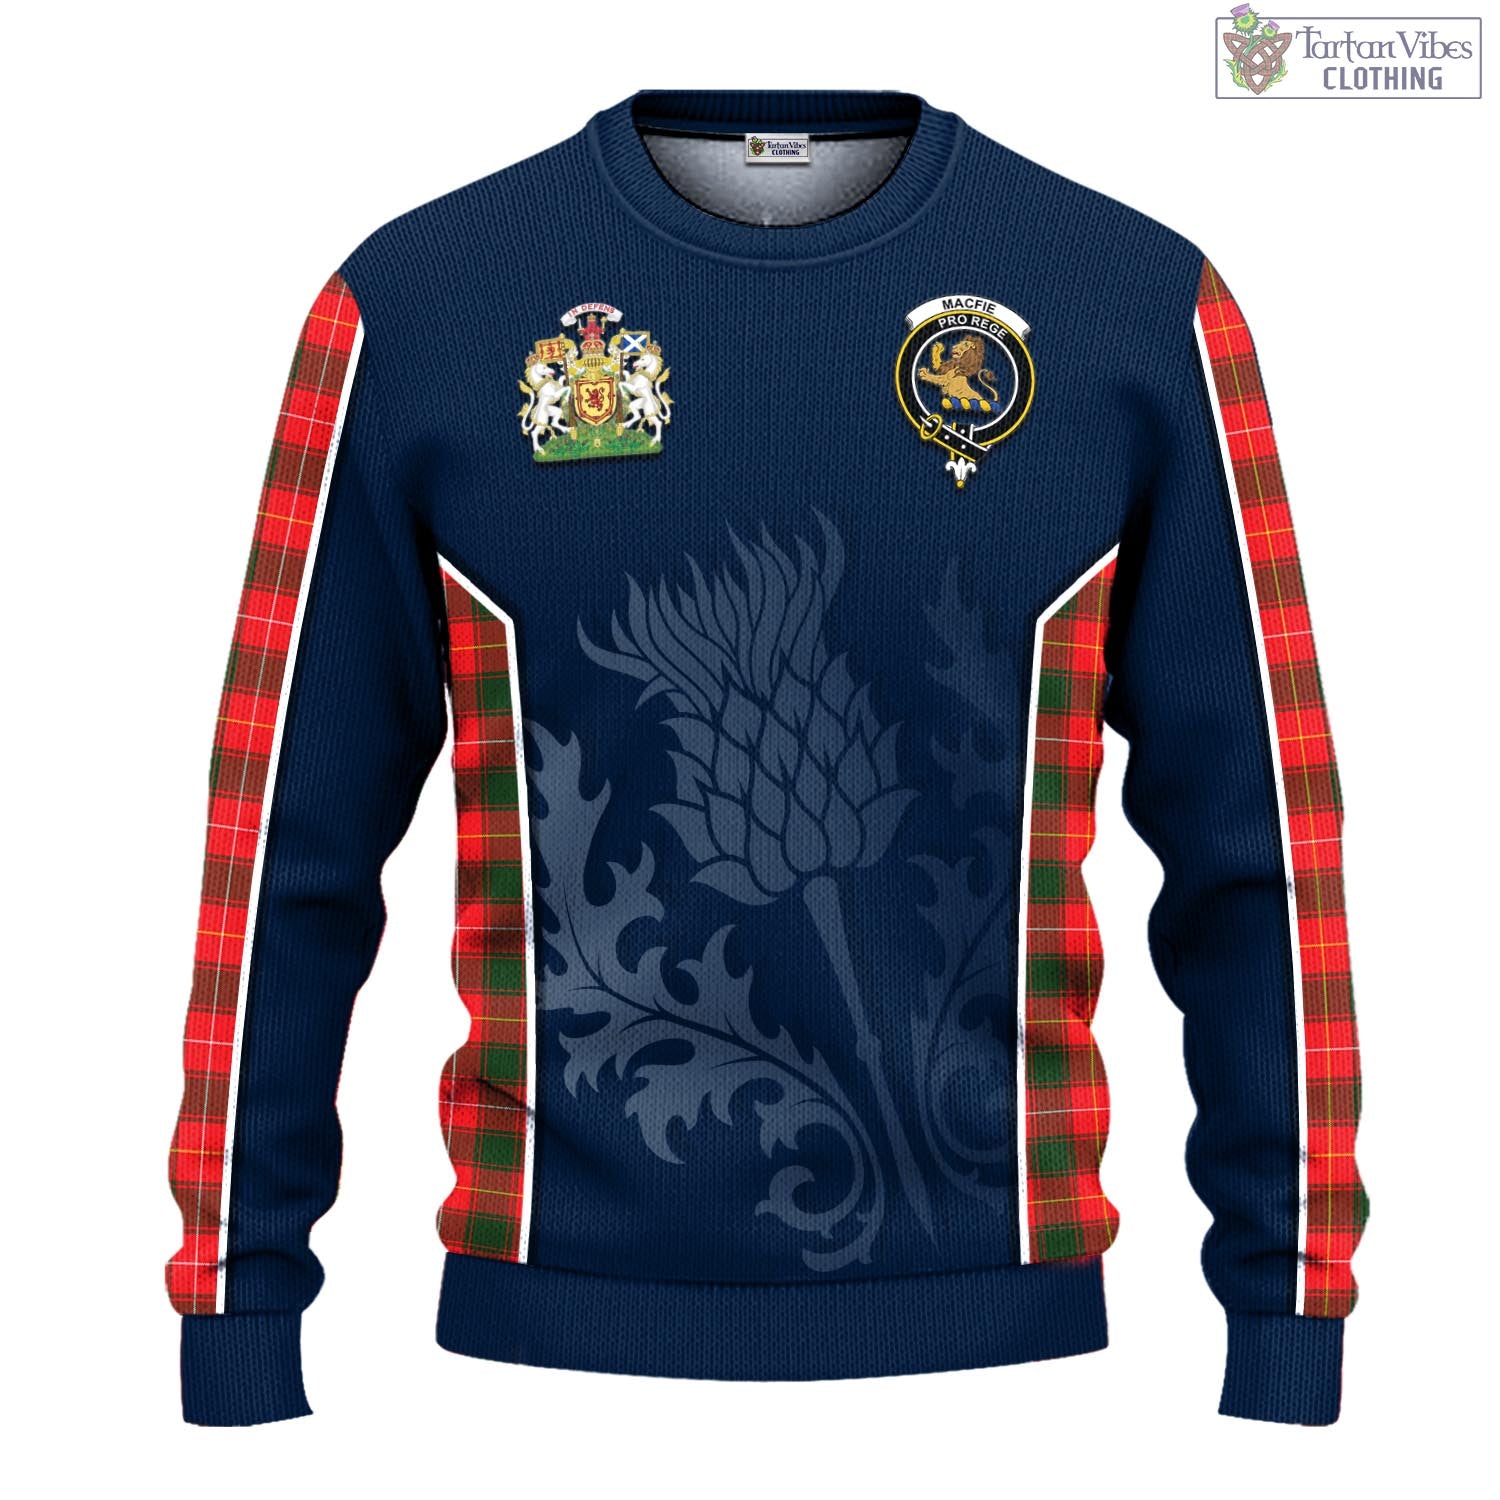 Tartan Vibes Clothing MacFie Modern Tartan Knitted Sweatshirt with Family Crest and Scottish Thistle Vibes Sport Style